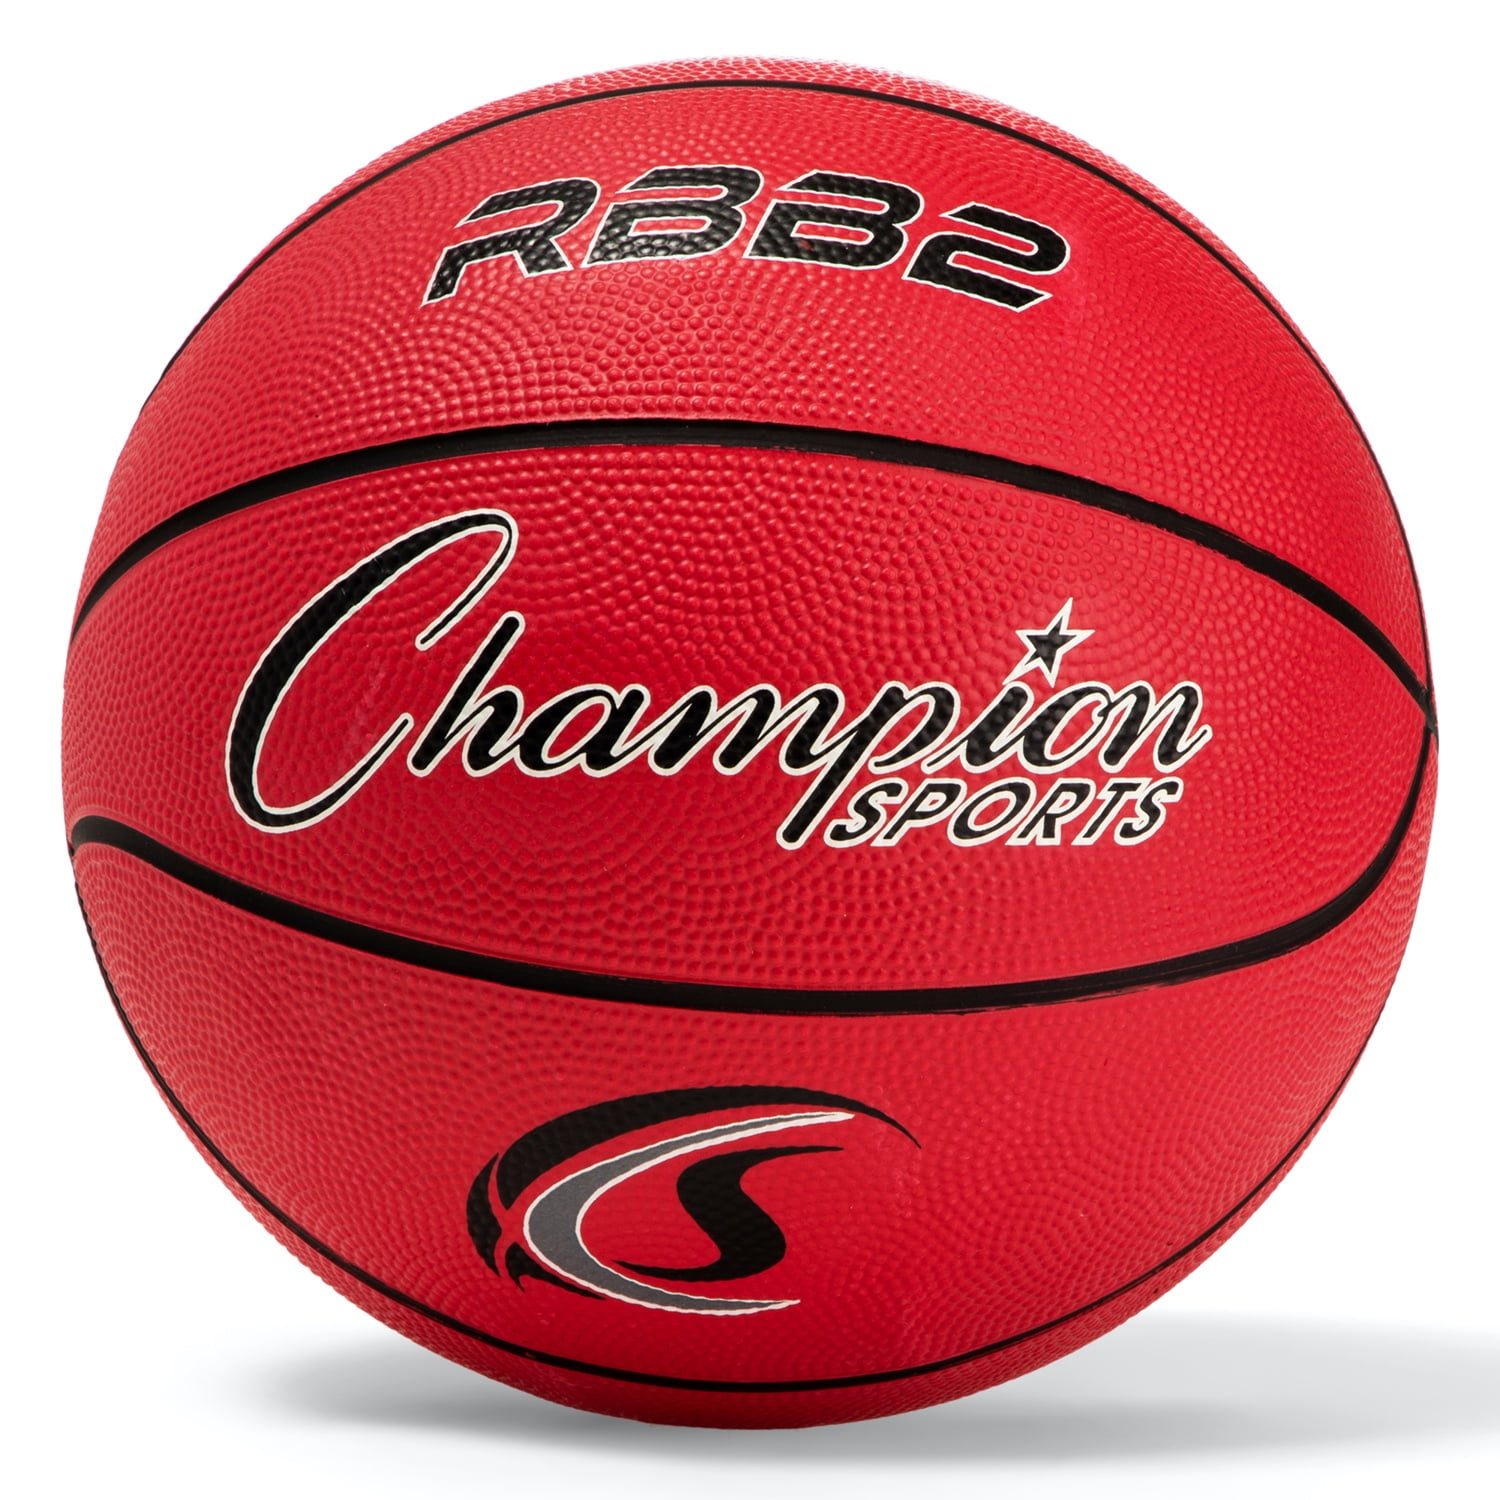 Picture of Champion Sports RBB2RD 27.5 in. Pro Rubber Basketball, Red